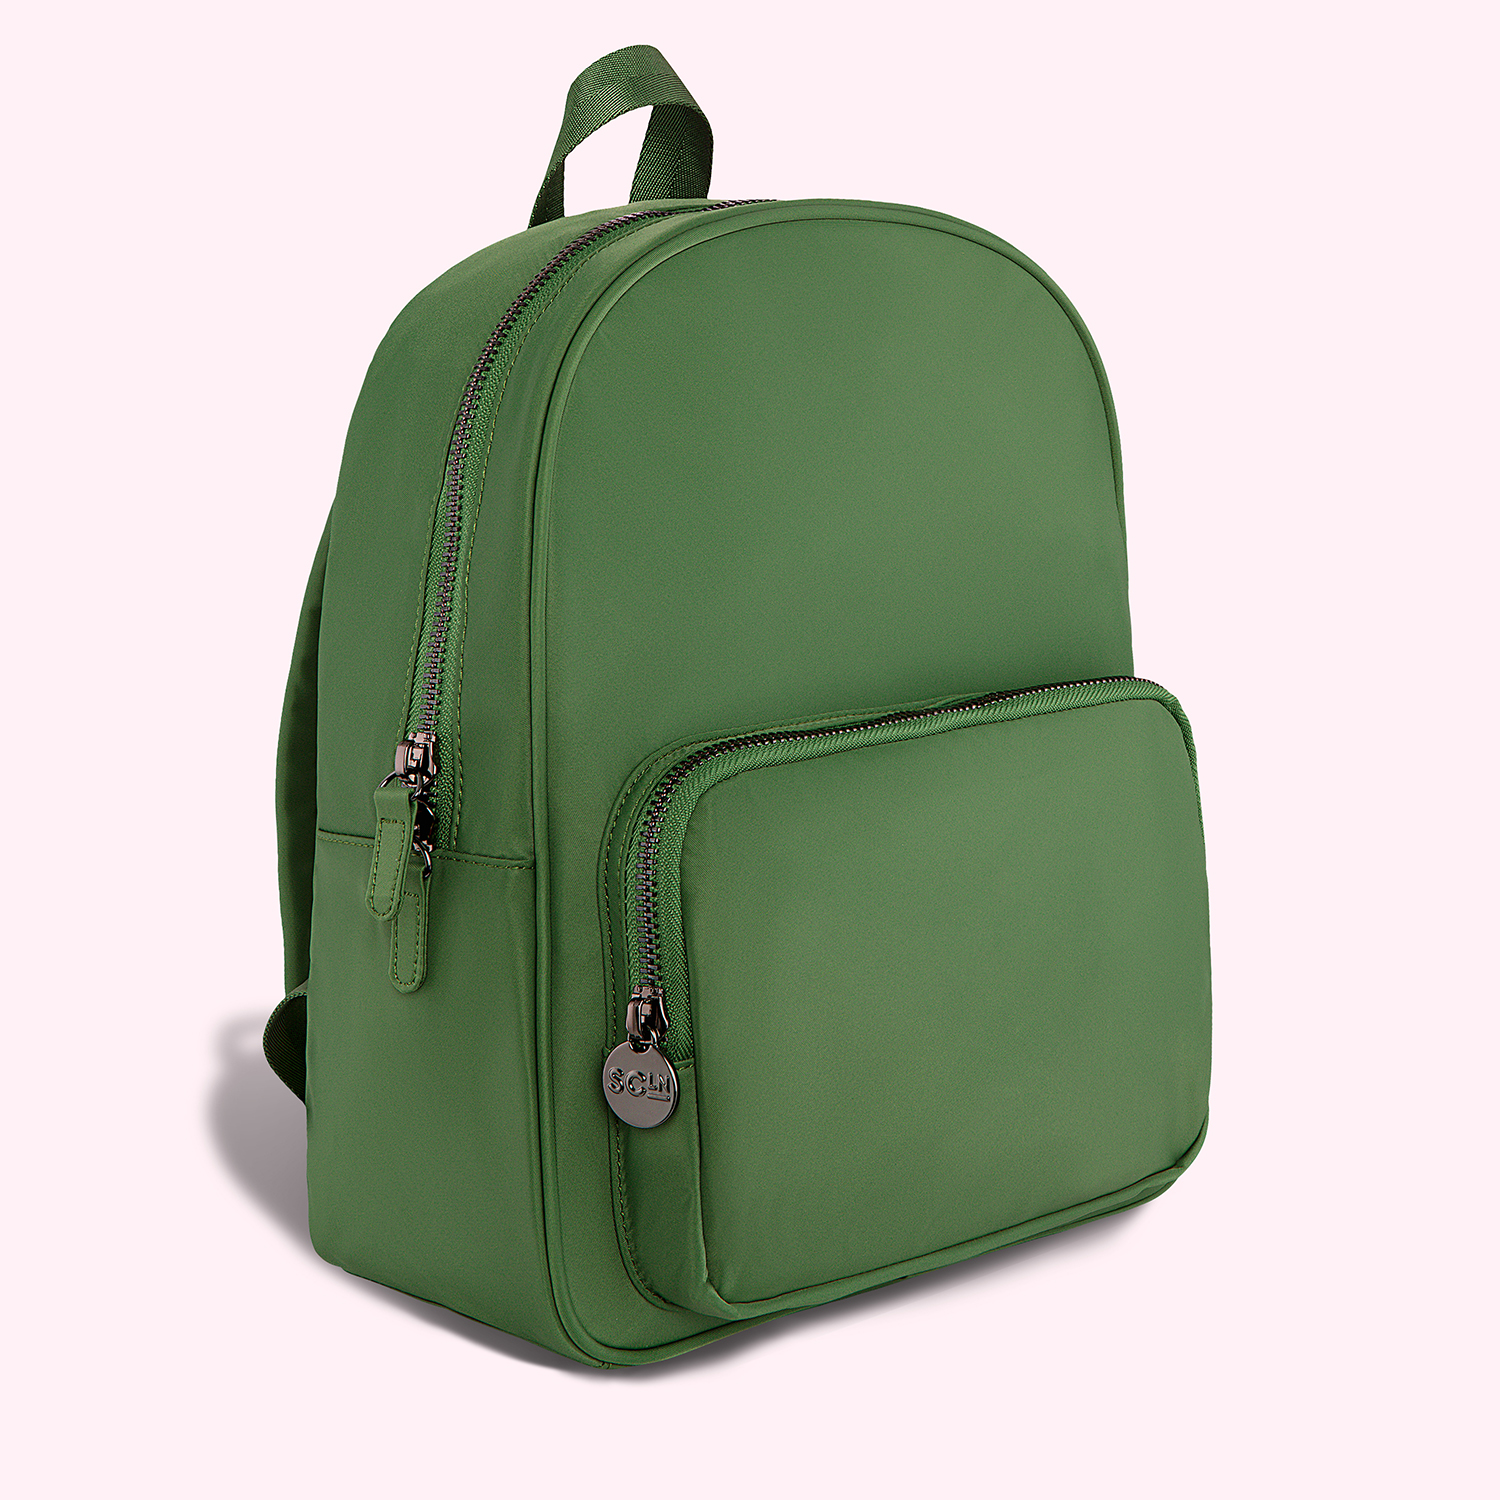 Mini Backpack for Coins & Small Items - Solid Color – Camp Grant Walker 4-H  Store